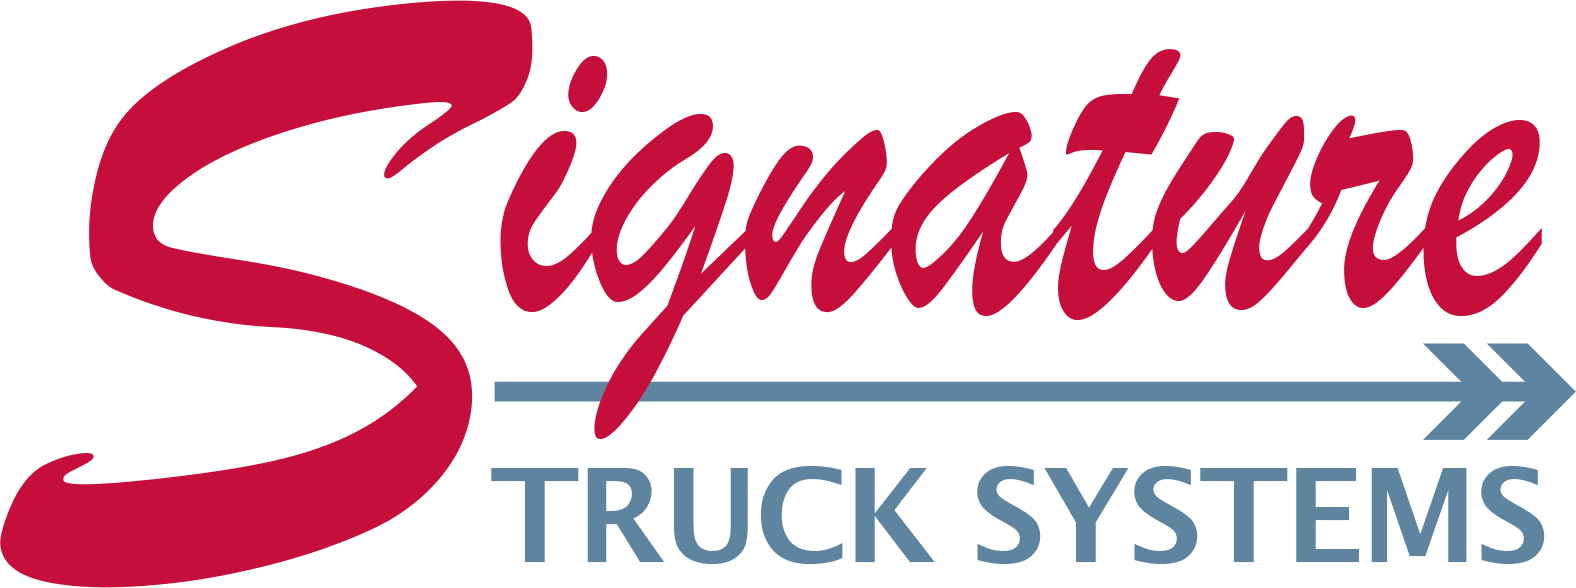 Signature Truck Systems